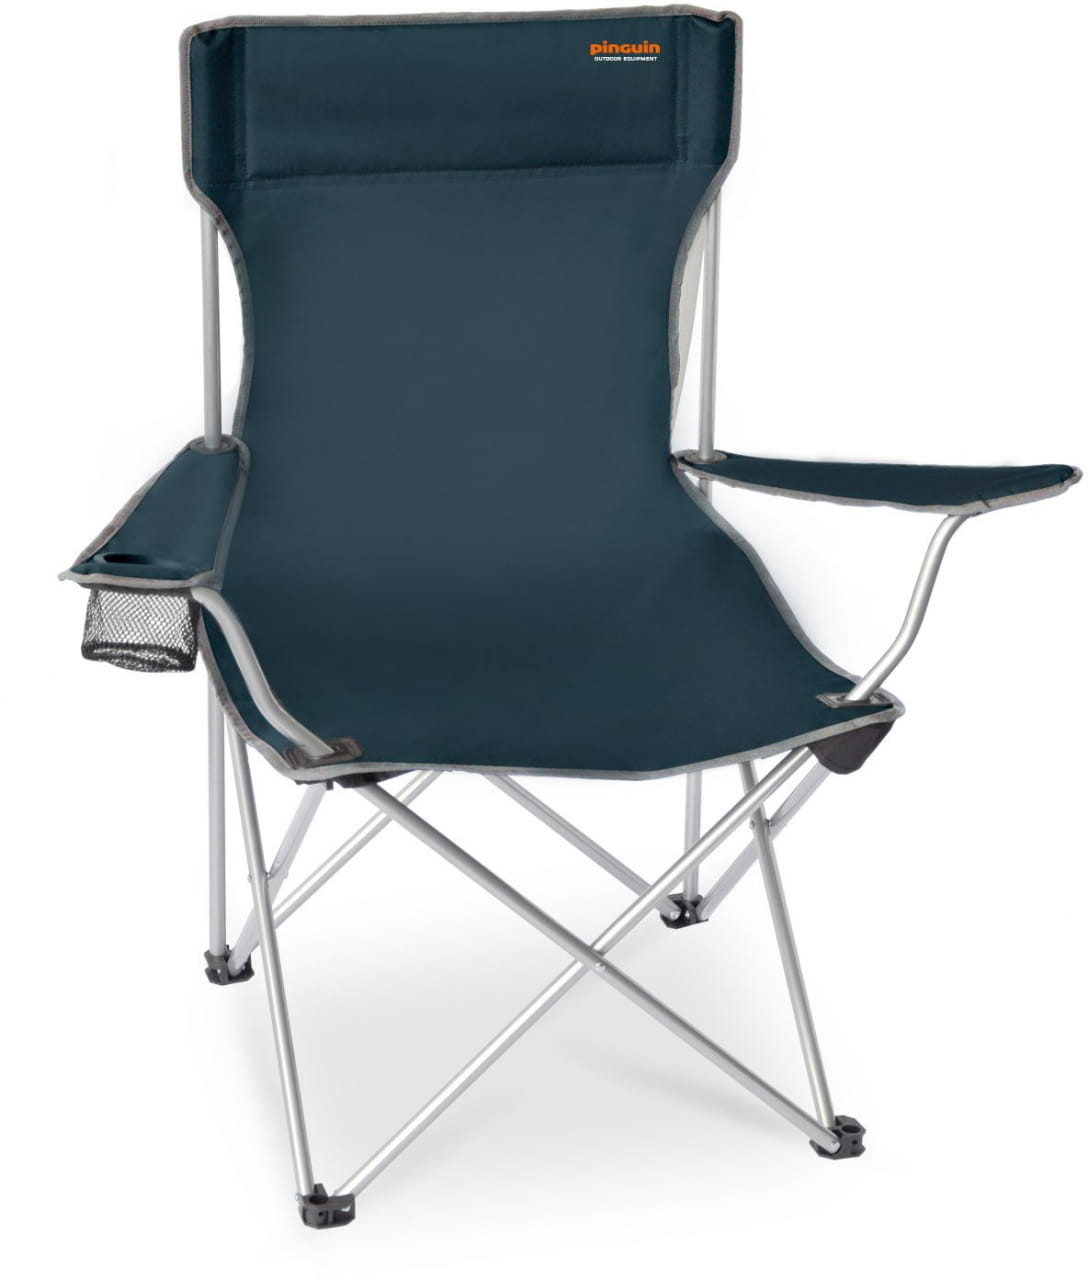 Camping-Möbel Pinguin Fisher chair